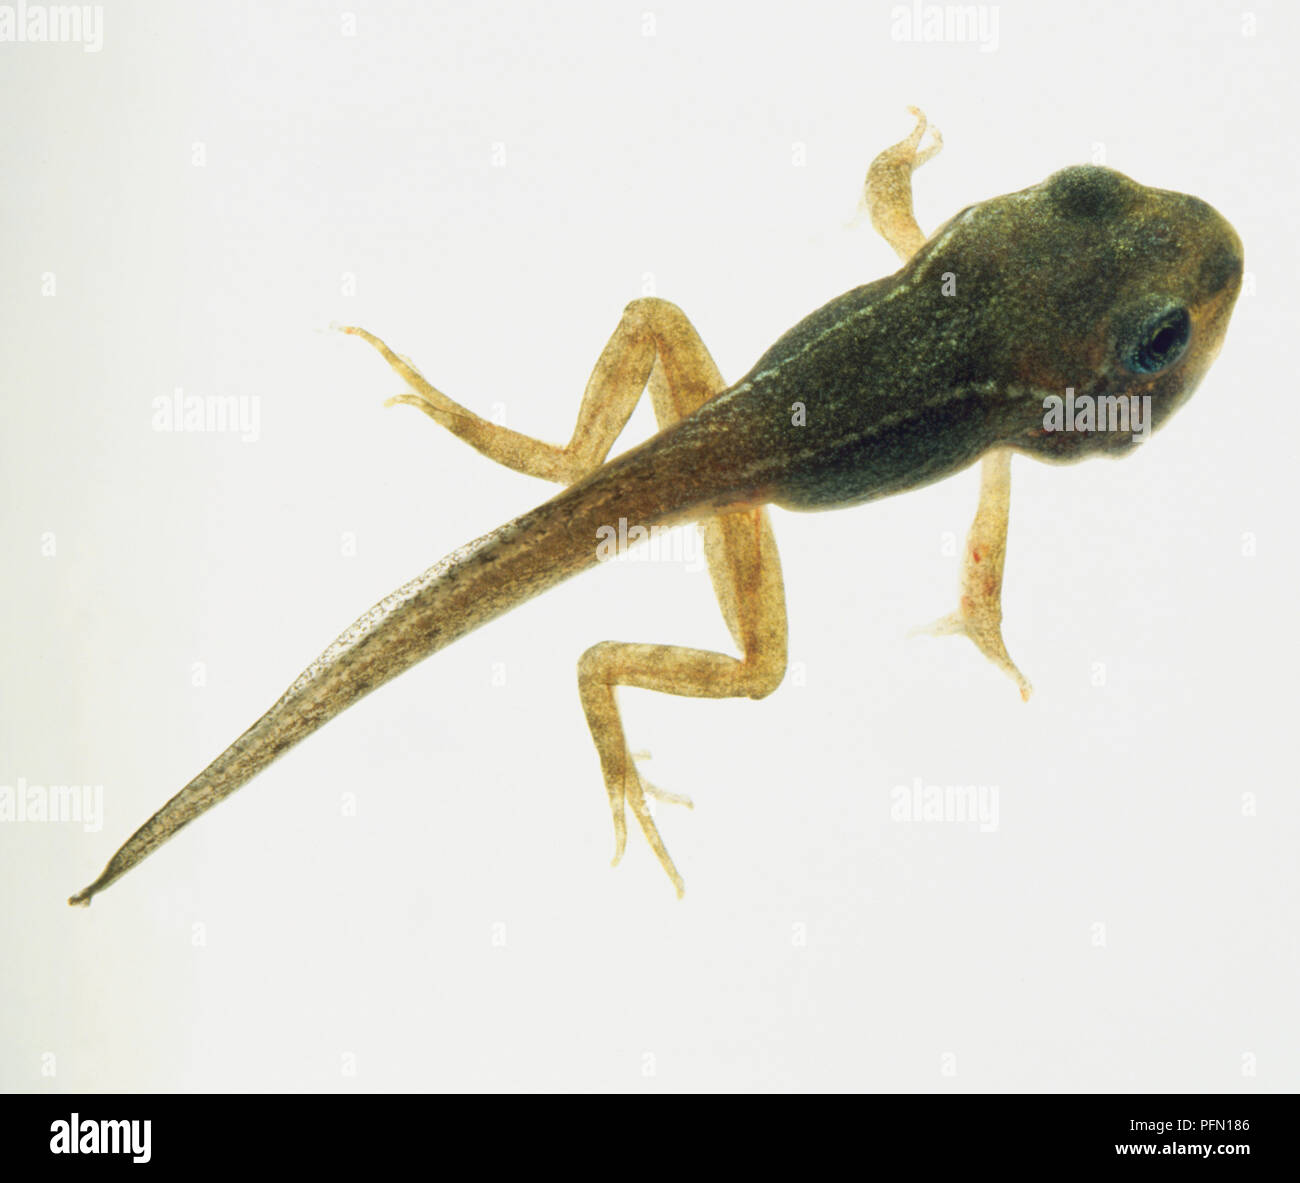 green tadpole with both front and back legs. Stock Photo